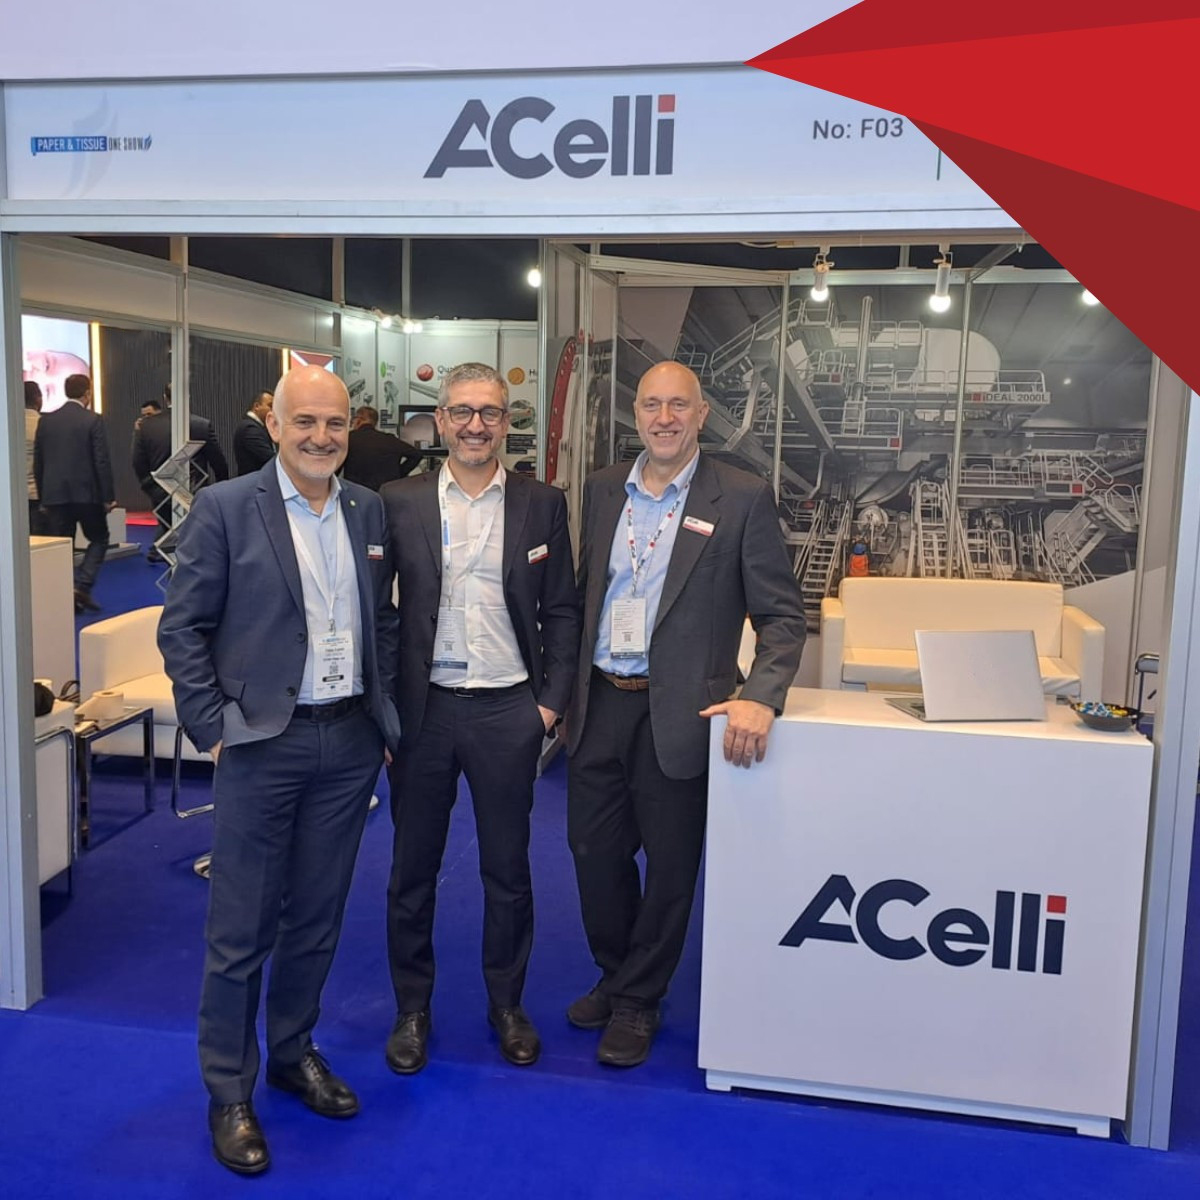 It’s the third and final day here at 𝐏𝐀𝐏𝐄𝐑 & 𝐓𝐈𝐒𝐒𝐔𝐄 𝐎𝐍𝐄 𝐒𝐇𝐎𝐖 𝟐𝟎𝟐𝟒.

It was a great experience, and we thank everyone who stopped by our booth to meet us

#acelli #onaroll #tissue #paper #papertissueoneshow #paperoneshow #exhibition #abudhabi #EAU